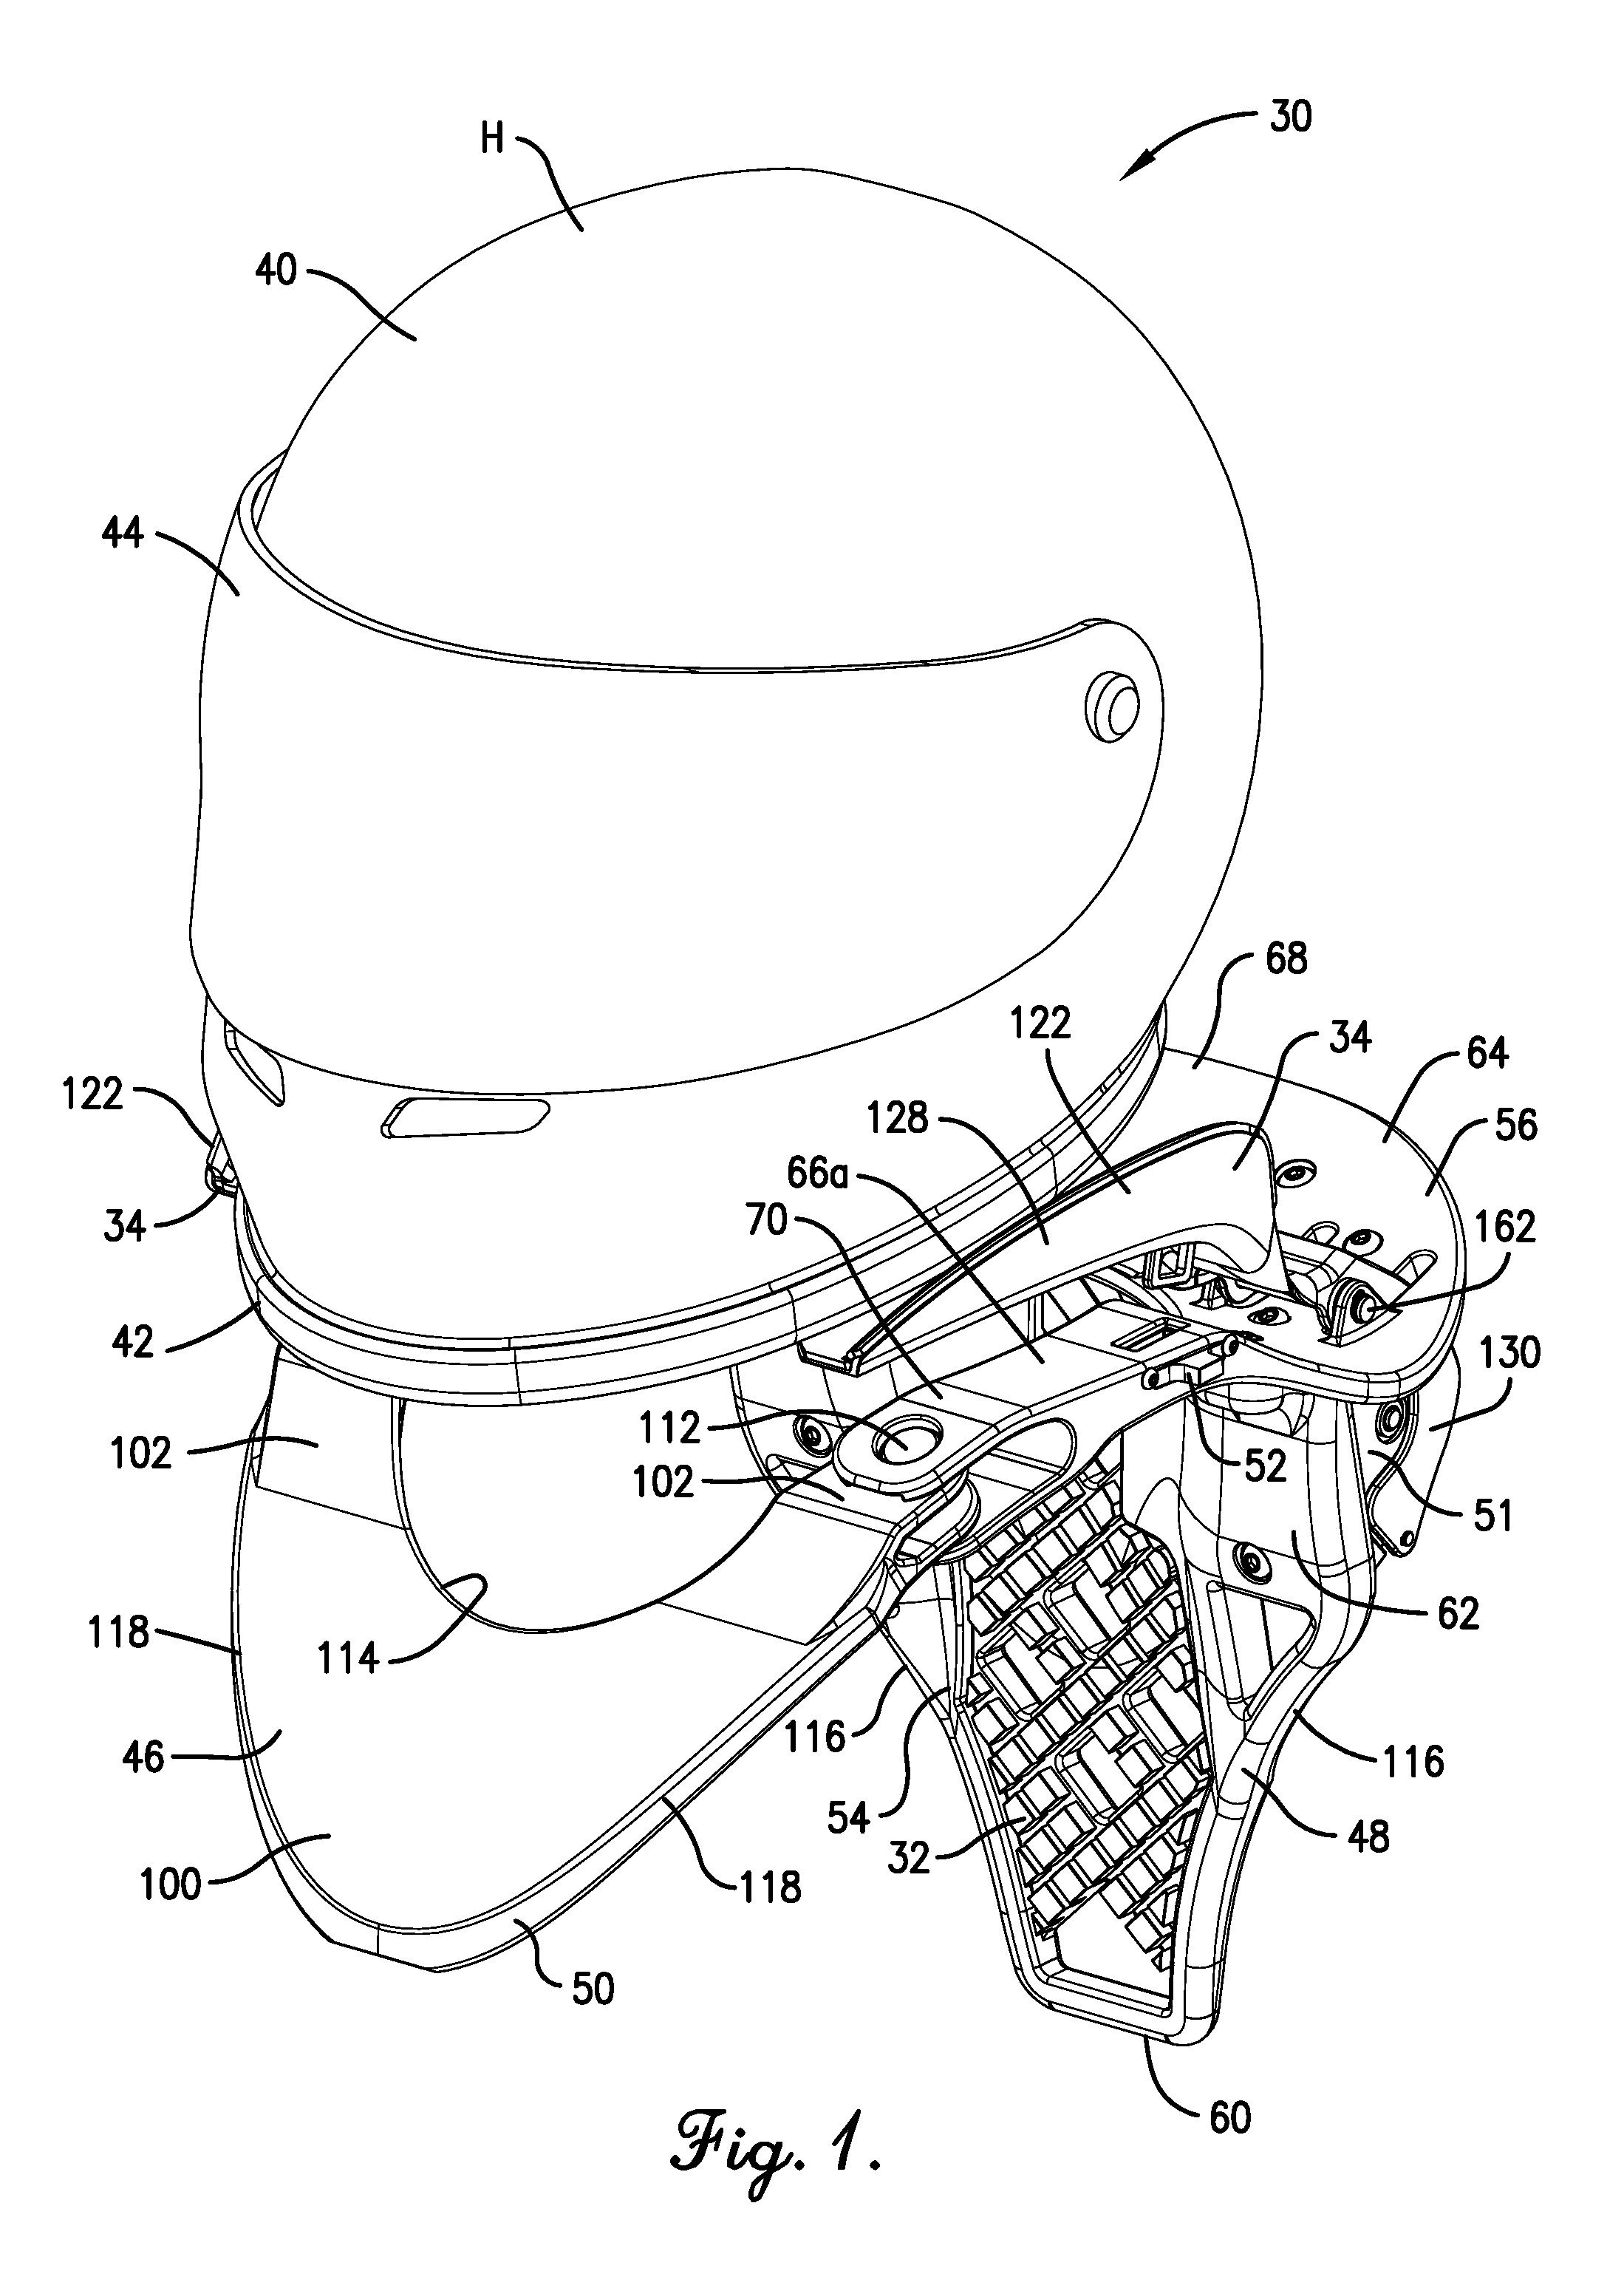 Device for reducing head and neck injury for helmet wearer